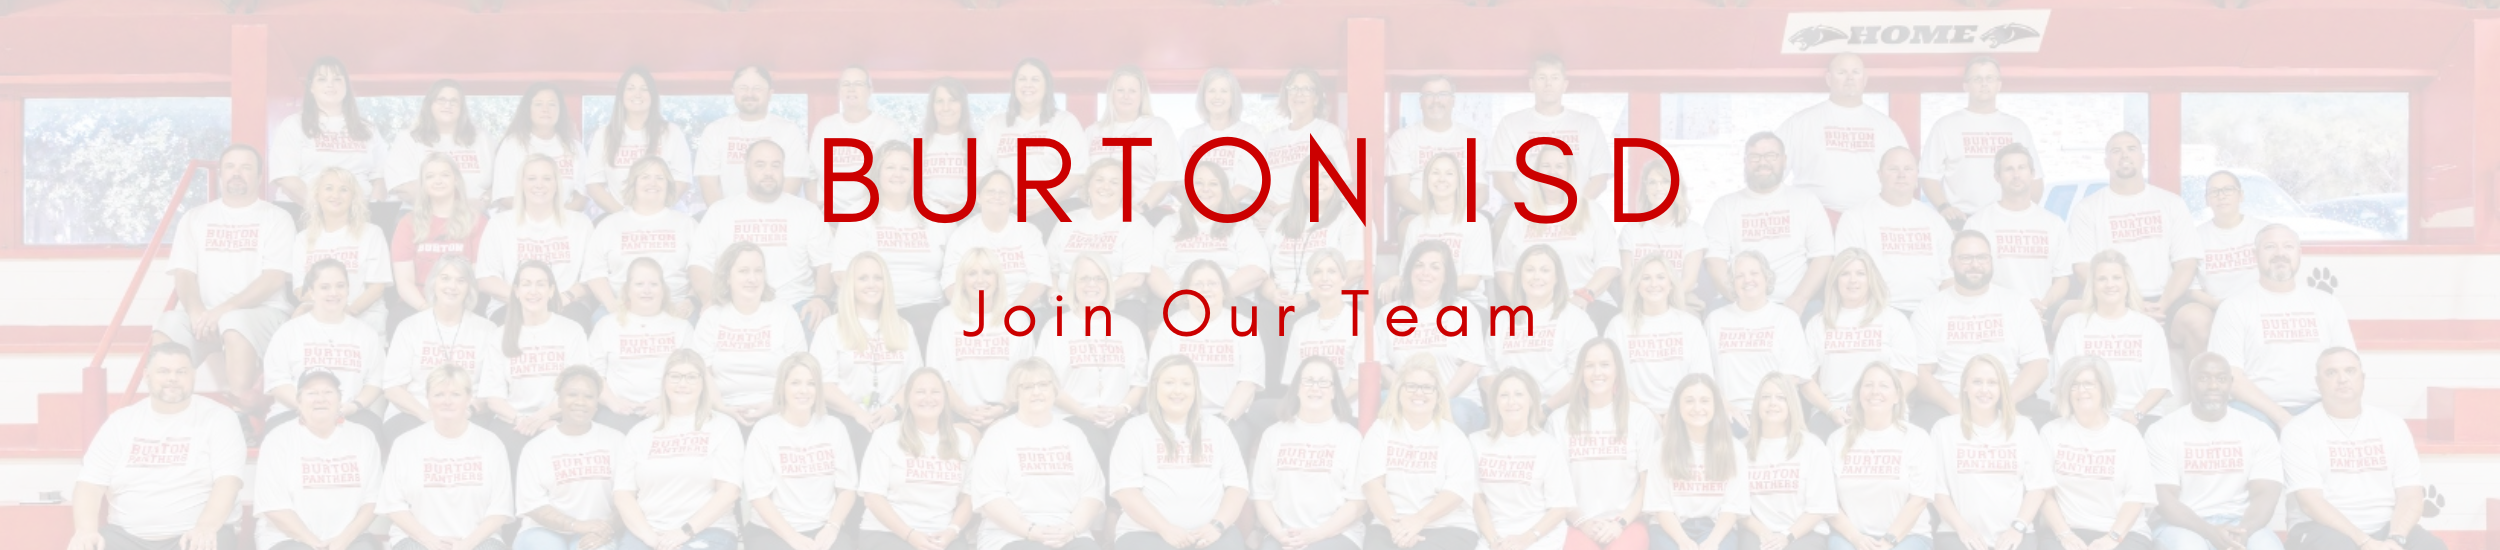 Burton ISD Join Our Team, image of staff